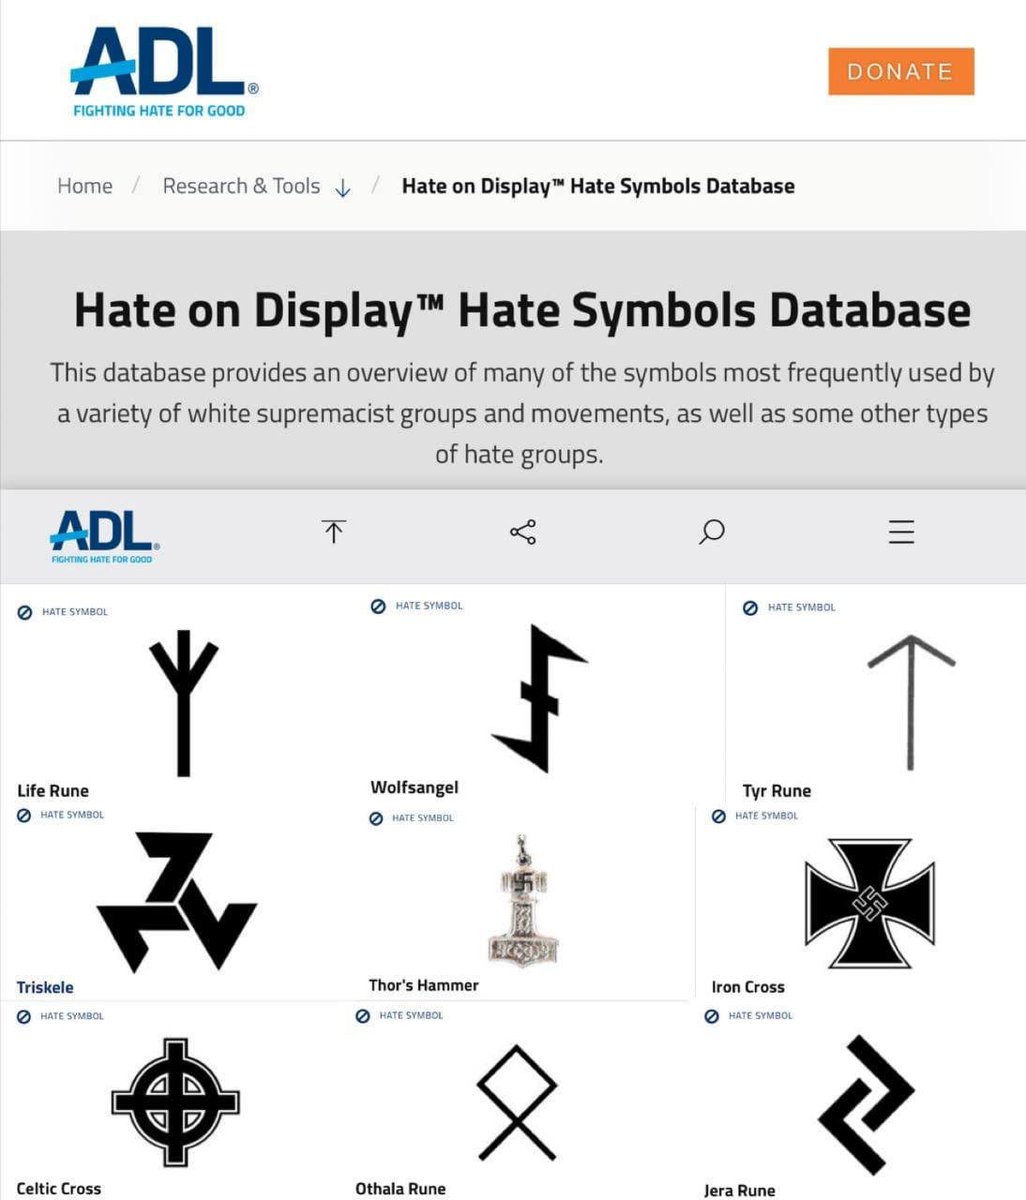 did @ADL really trademark the term 'Hate on Display' 🤔